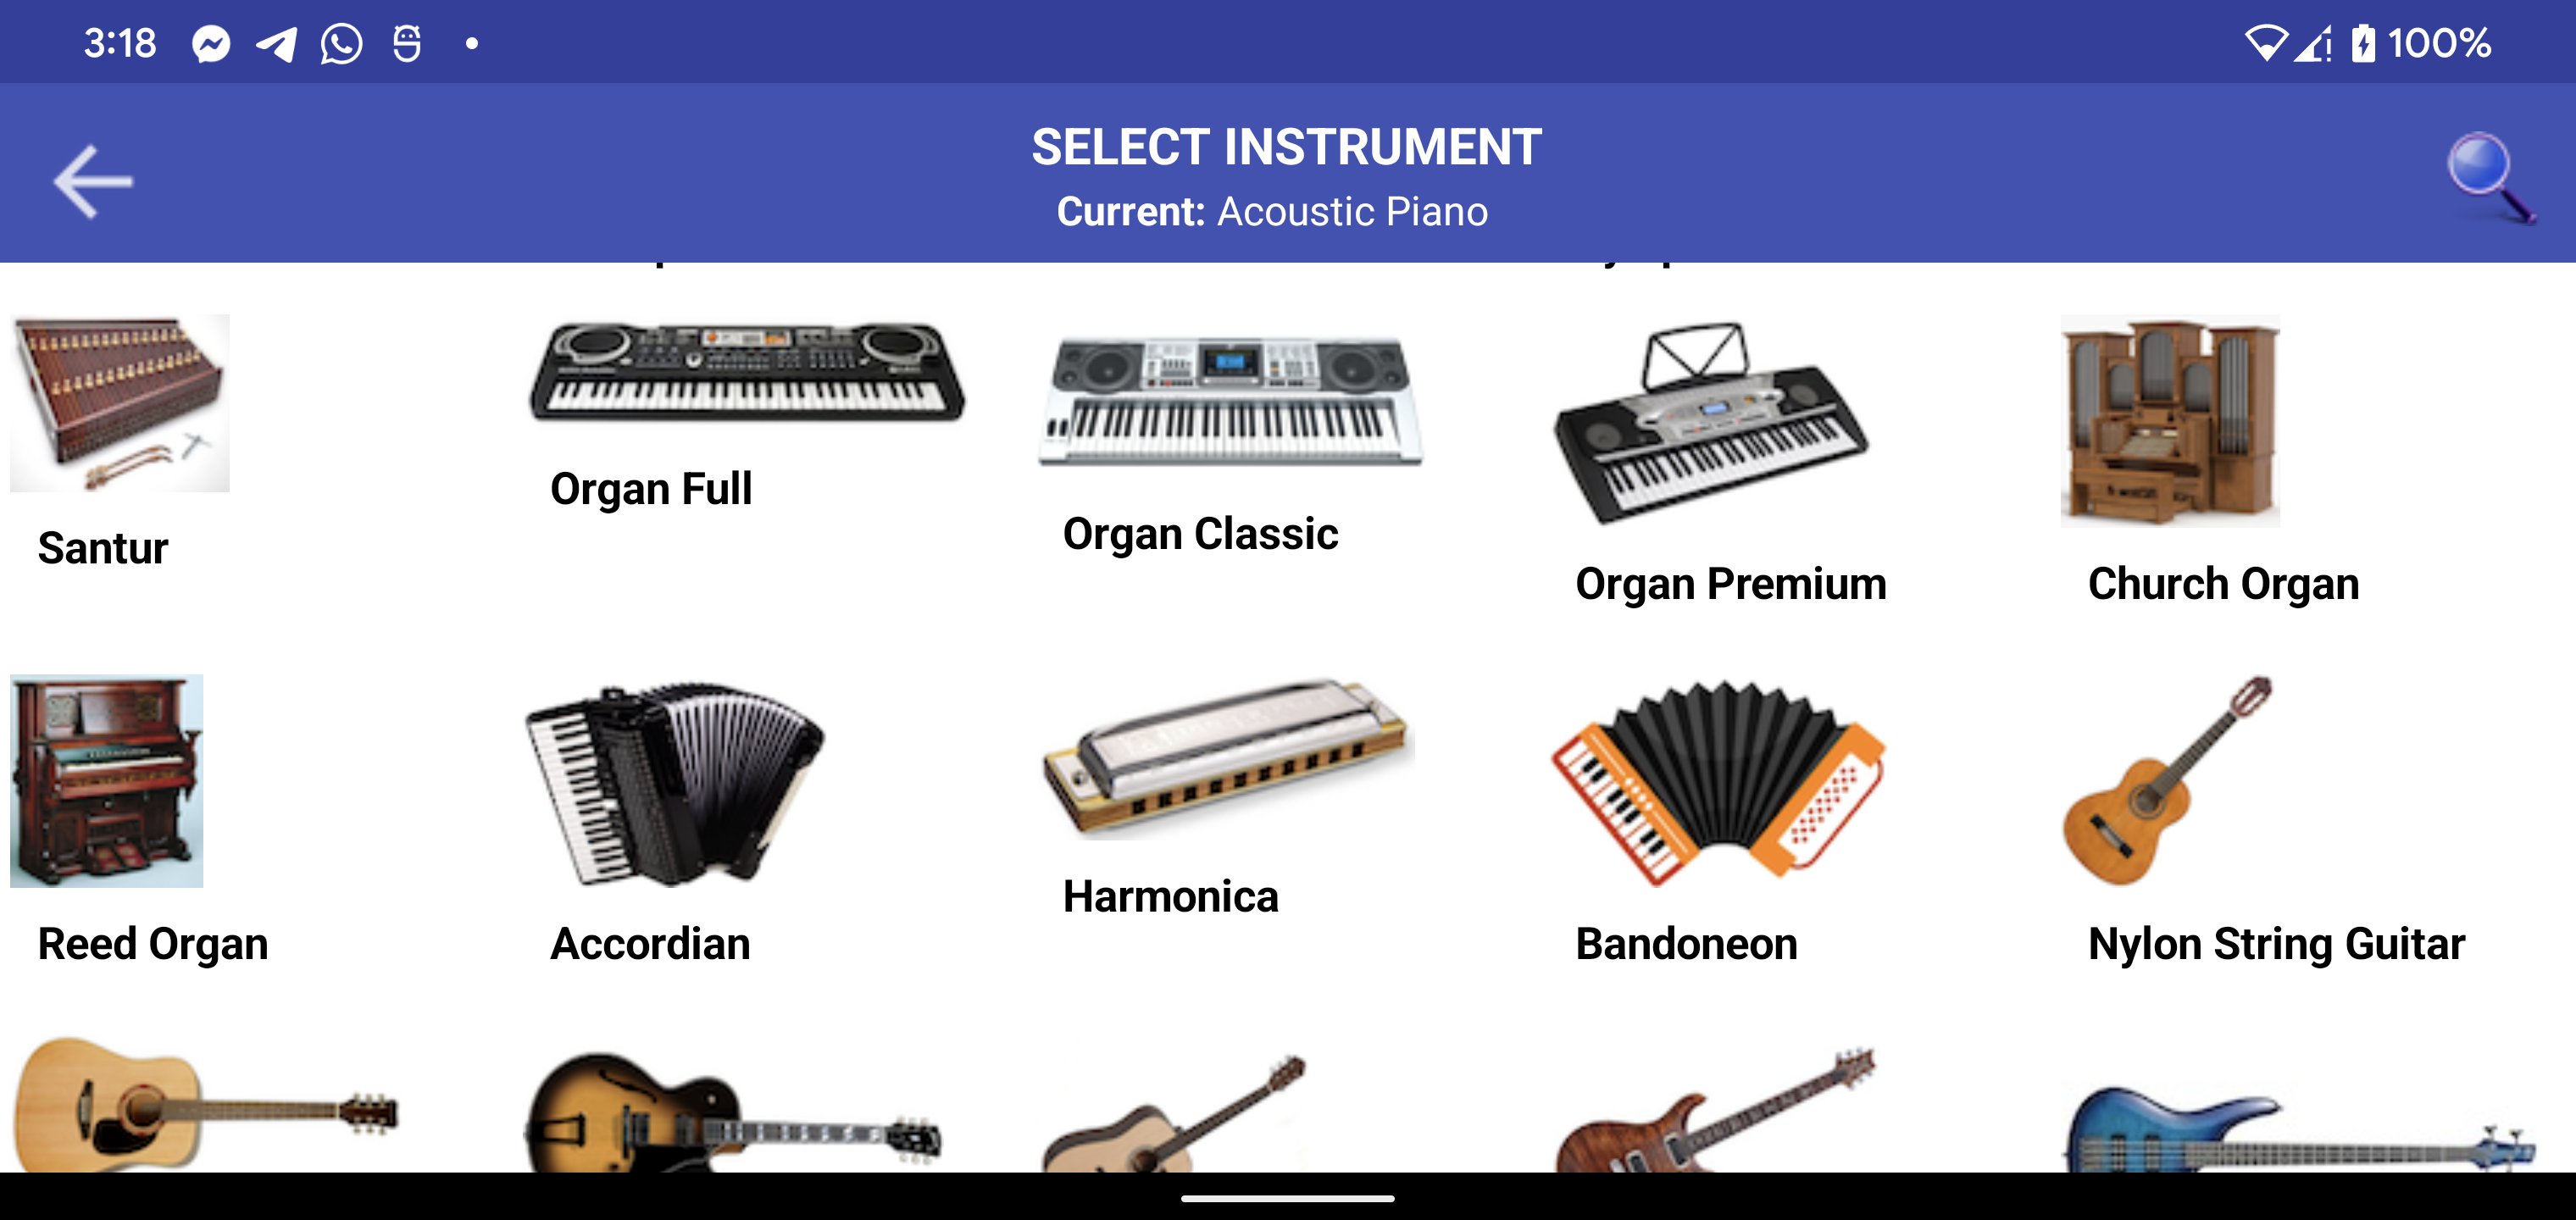 Real Piano Teacher - Apps on Google Play